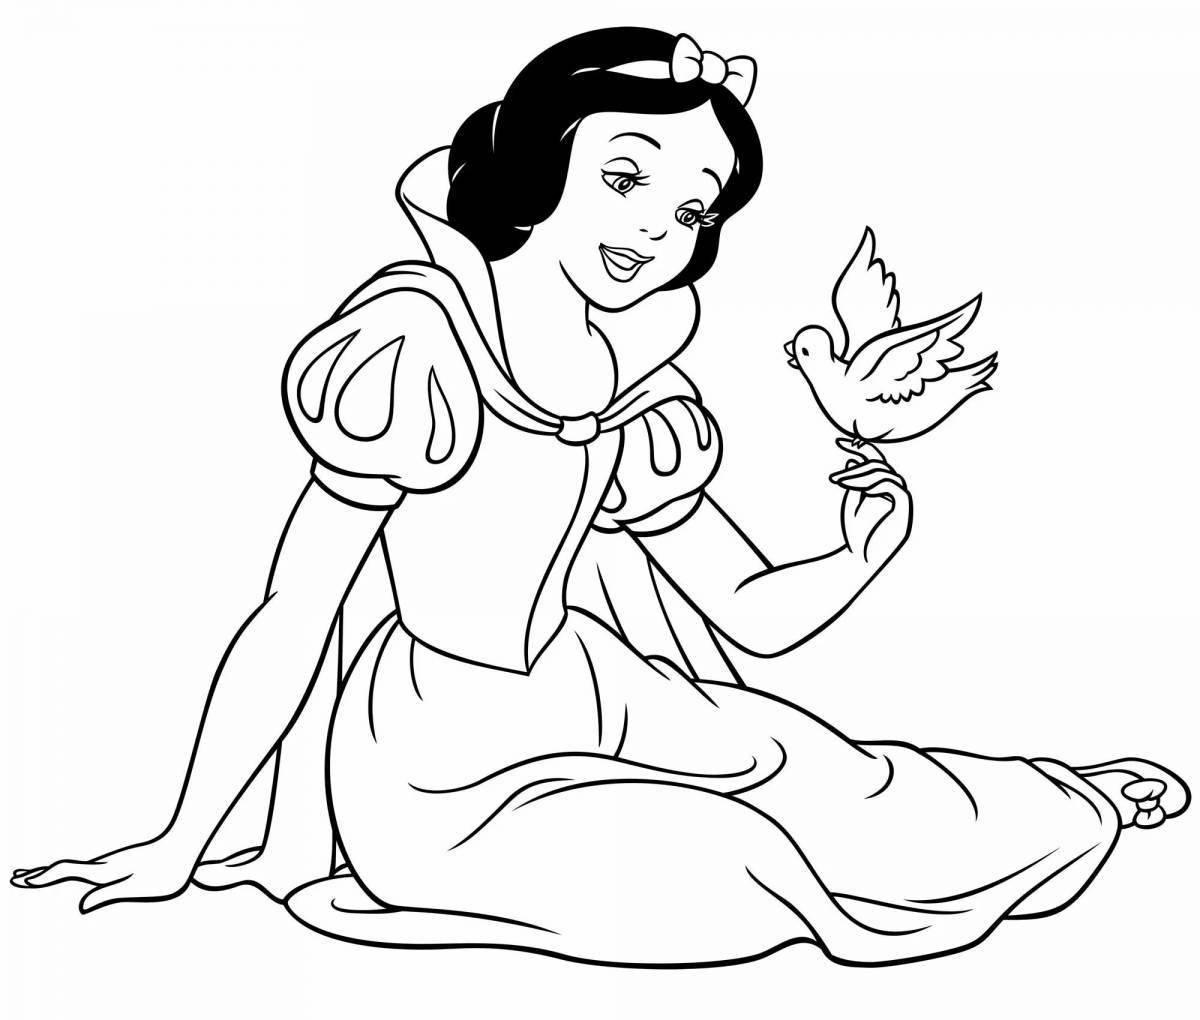 Amazing snow white coloring book for girls